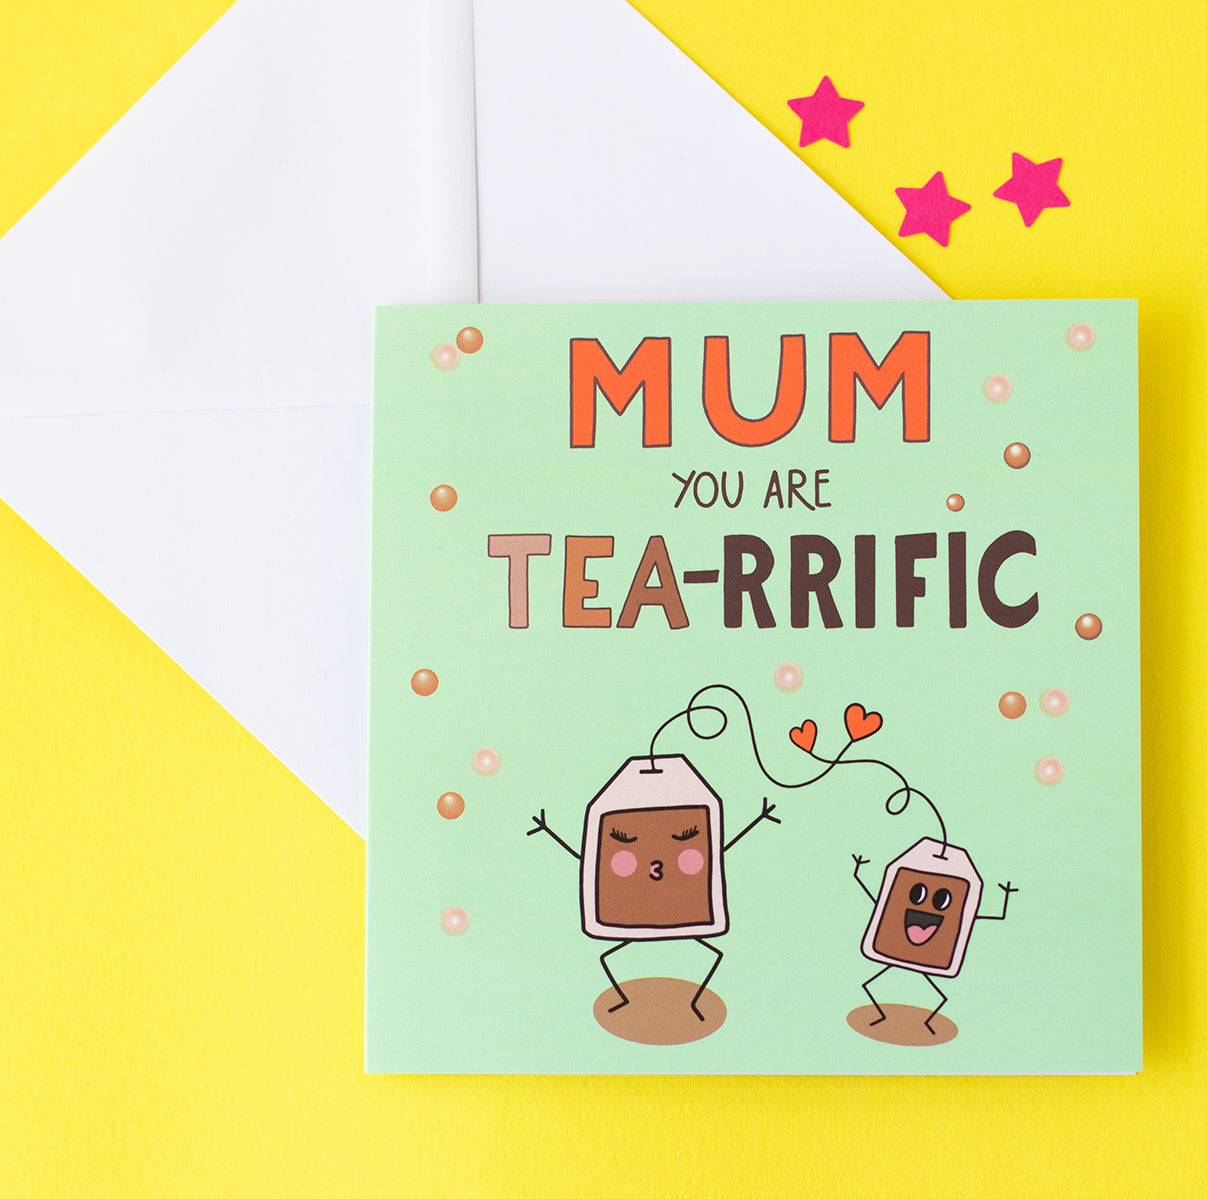 Mum You are Tea-Rriffic with dancing mum and child tea bags  on a green background with tea bubbles. 